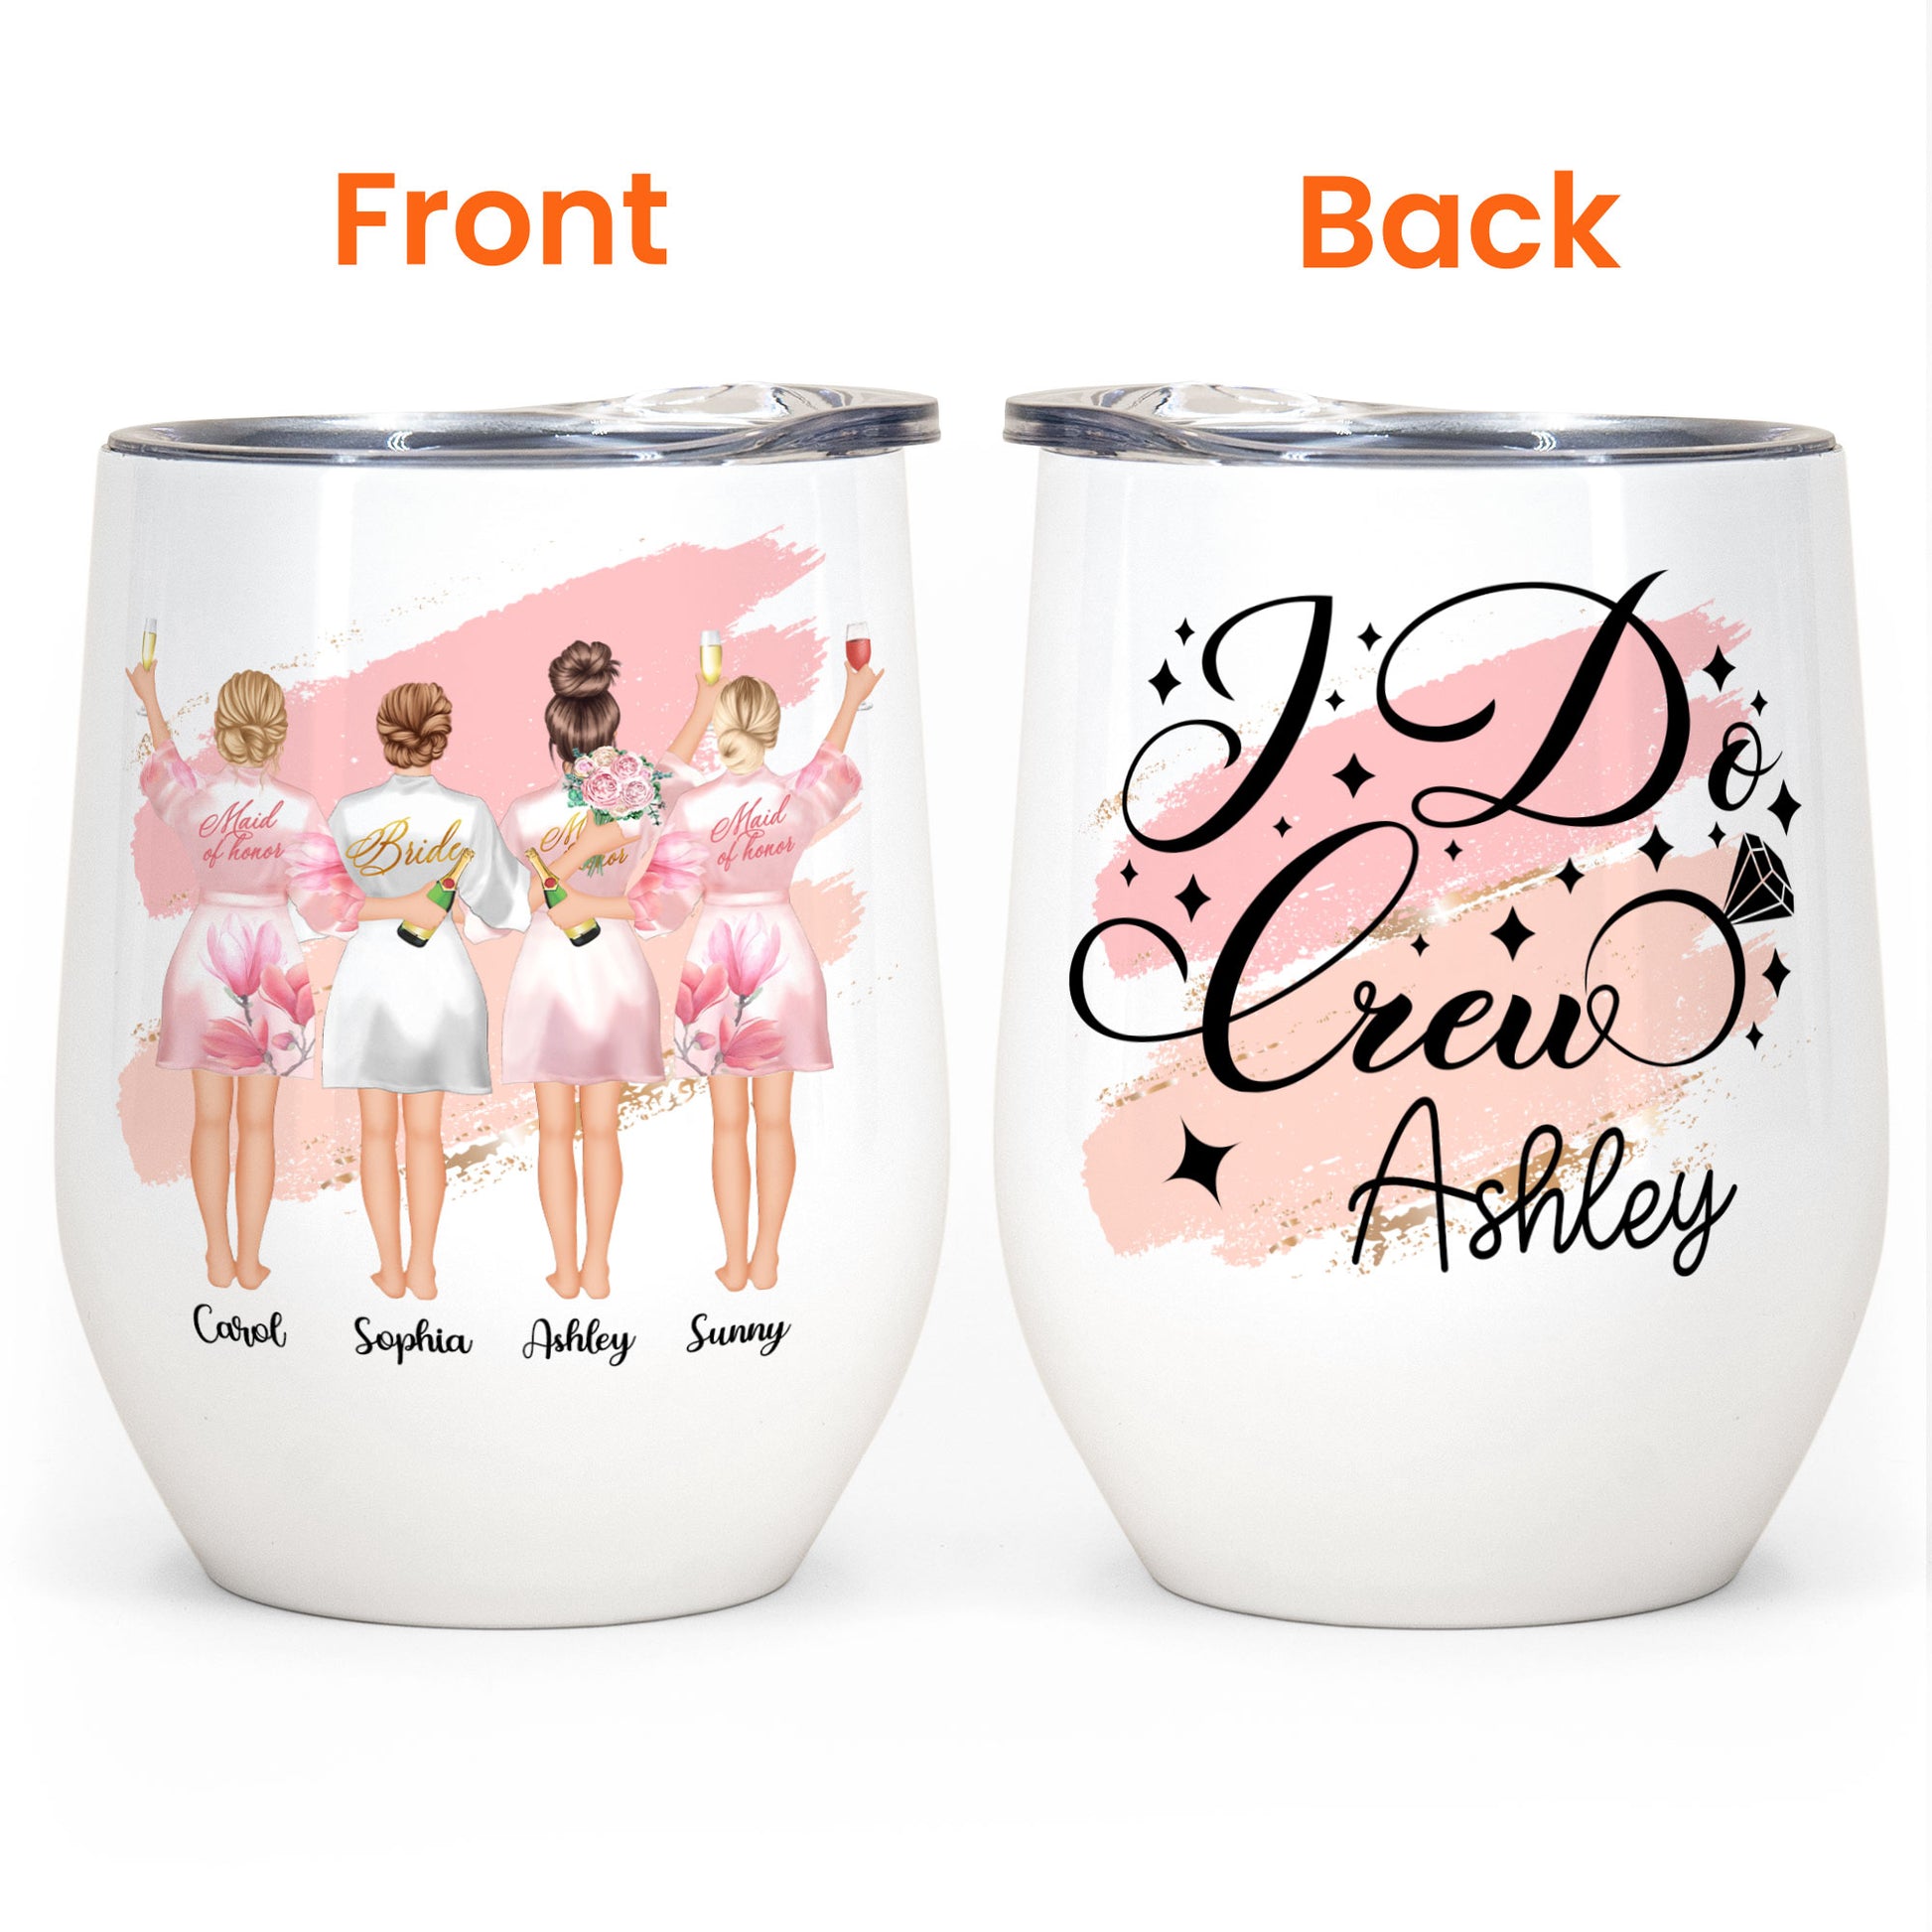 I Do Crew - Personalized Wine Tumbler - Funny, Bachelorette Party Gift For Bride, Bridesmaid